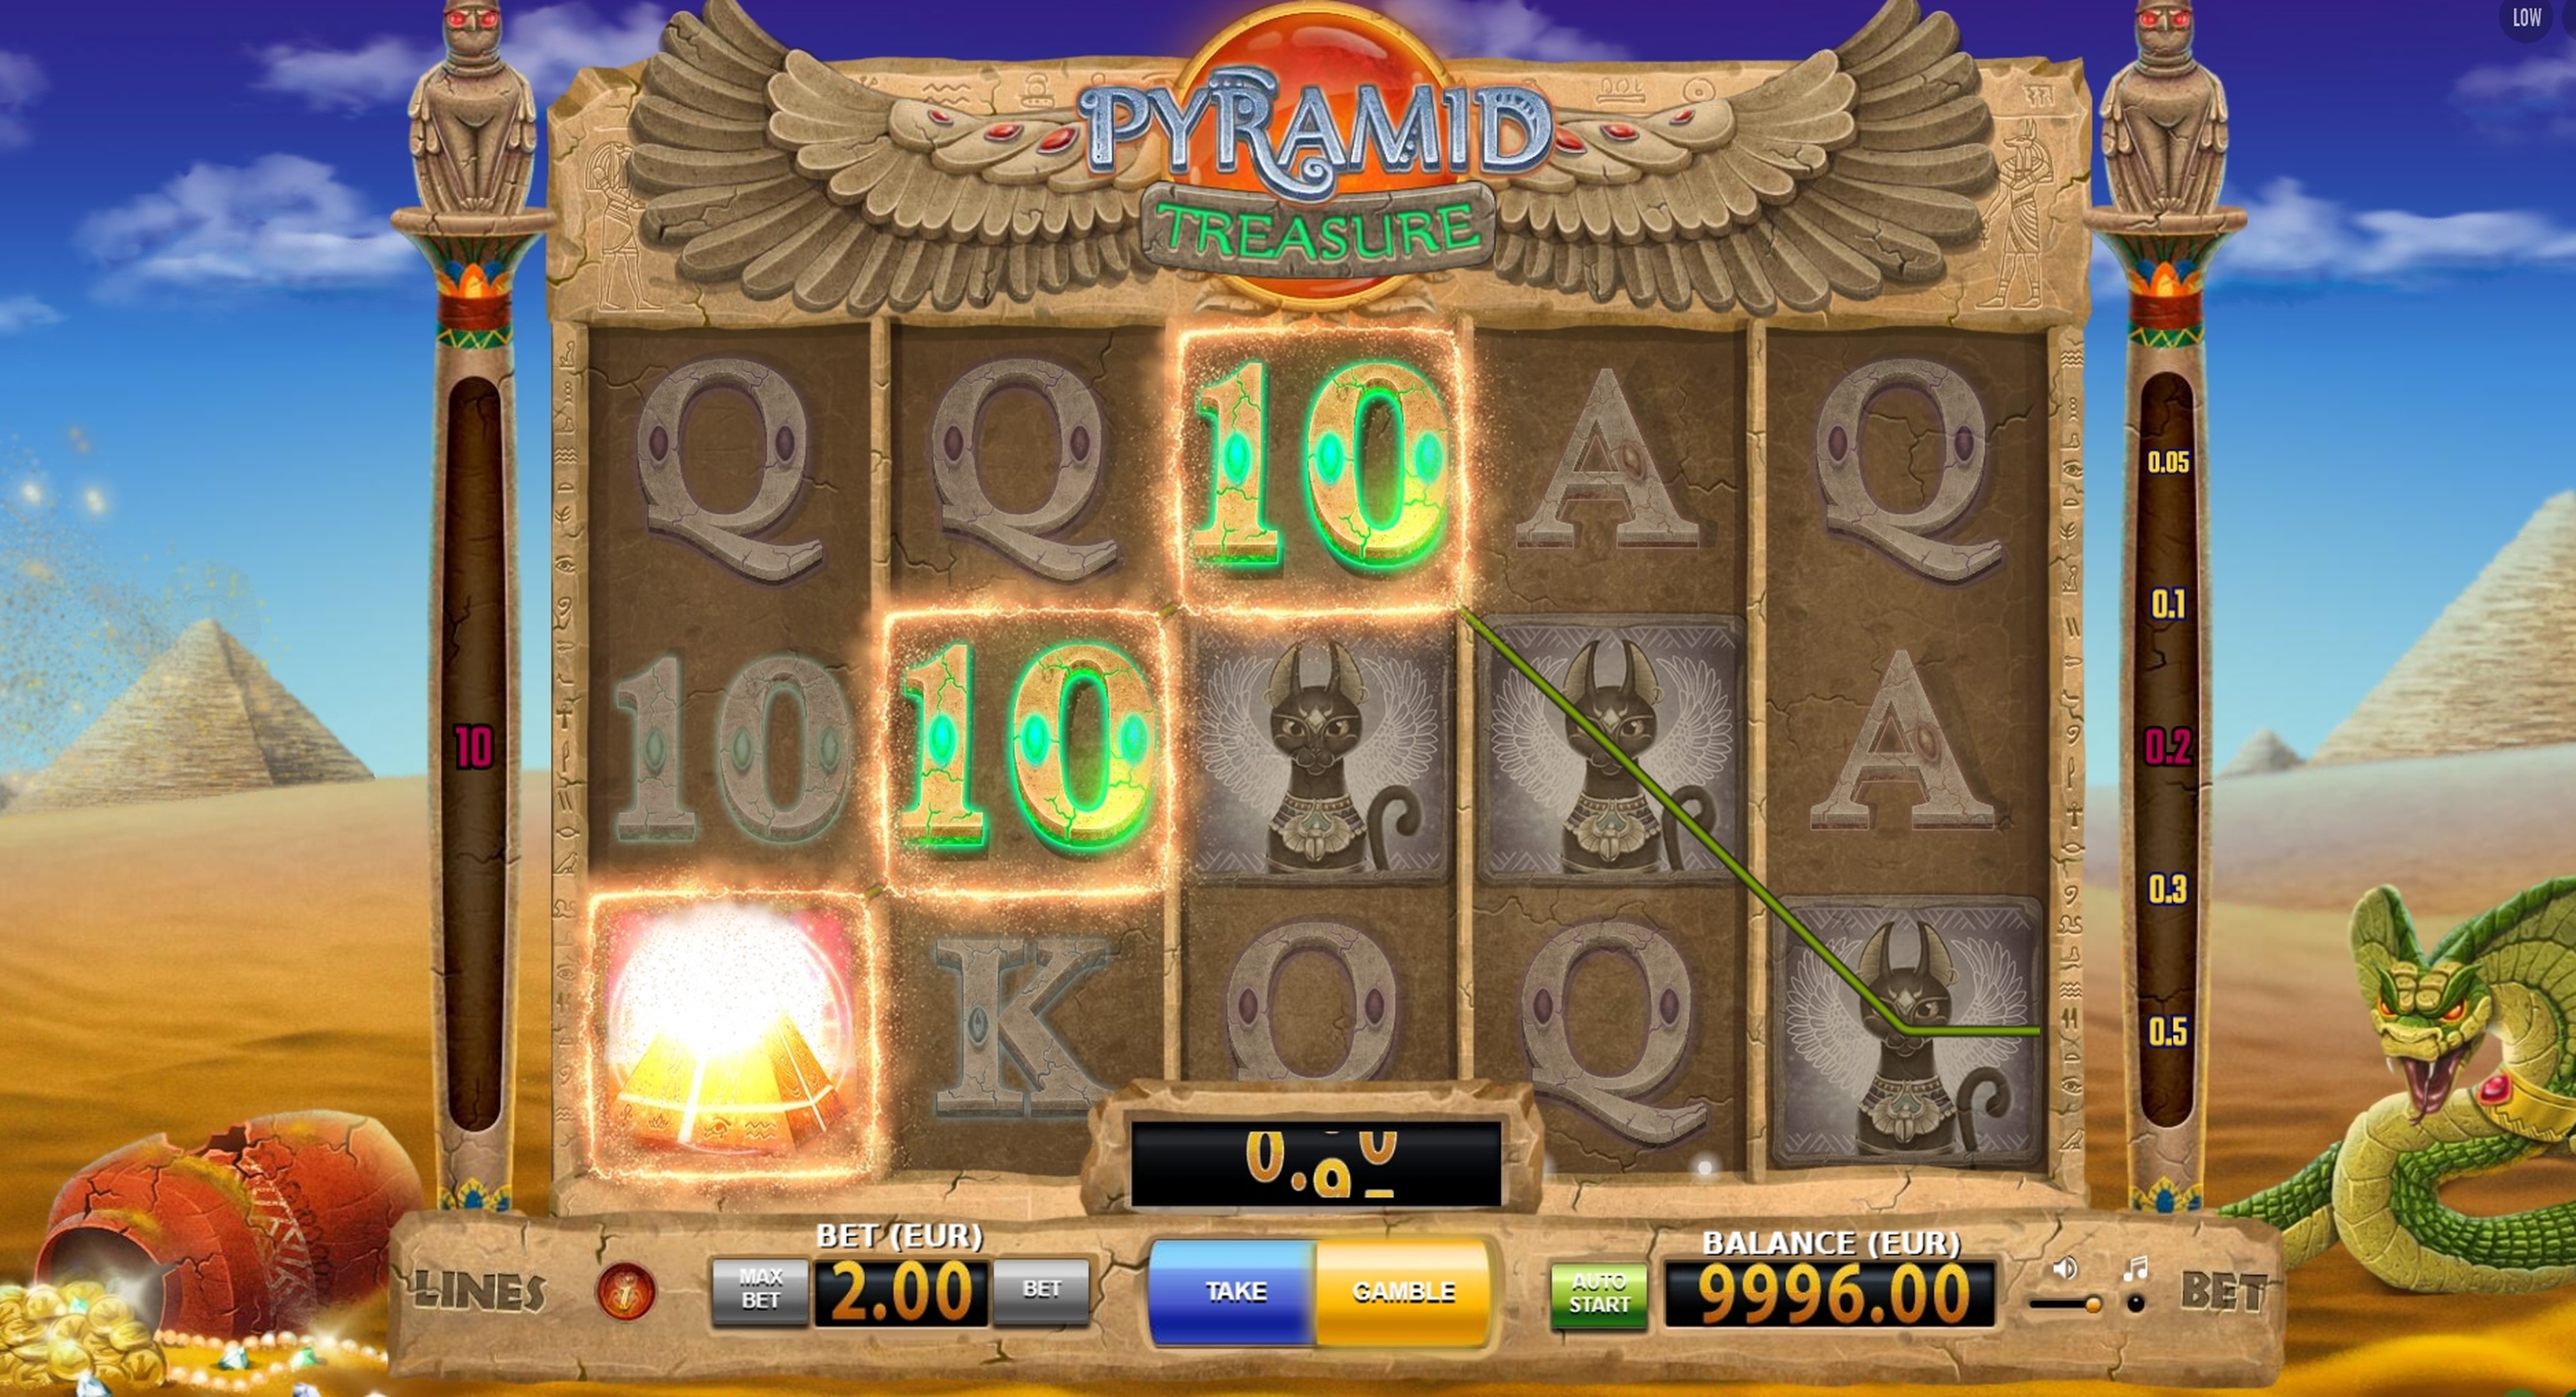 Win Money in Pyramid Treasure Free Slot Game by BF Games